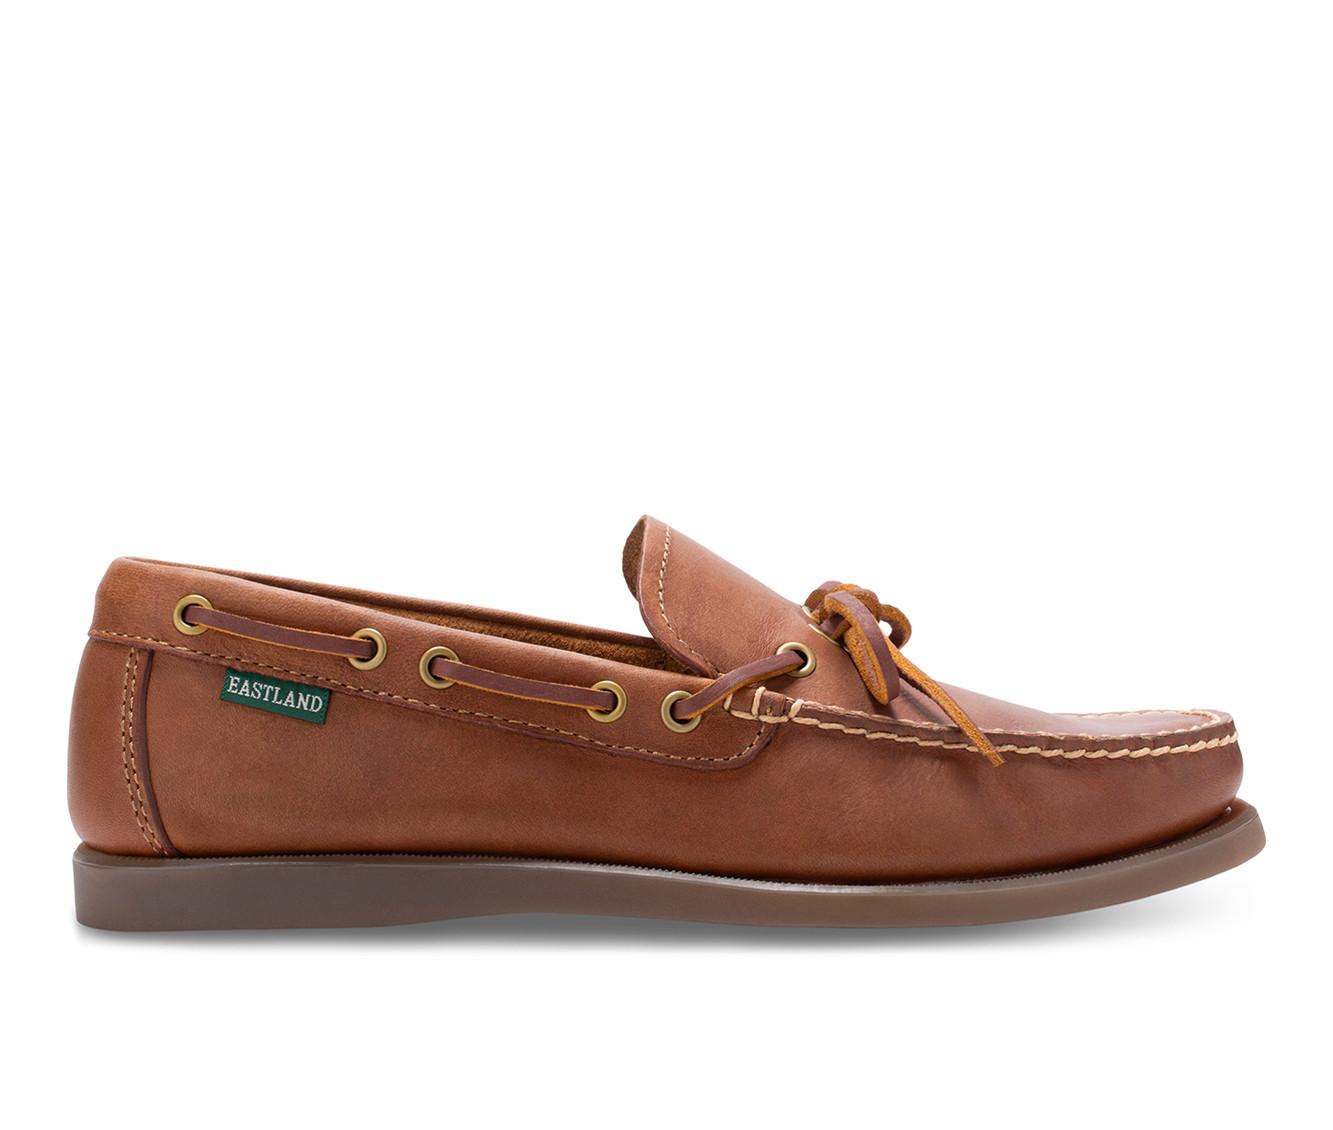 Men's Eastland Yarmouth Boat Shoes